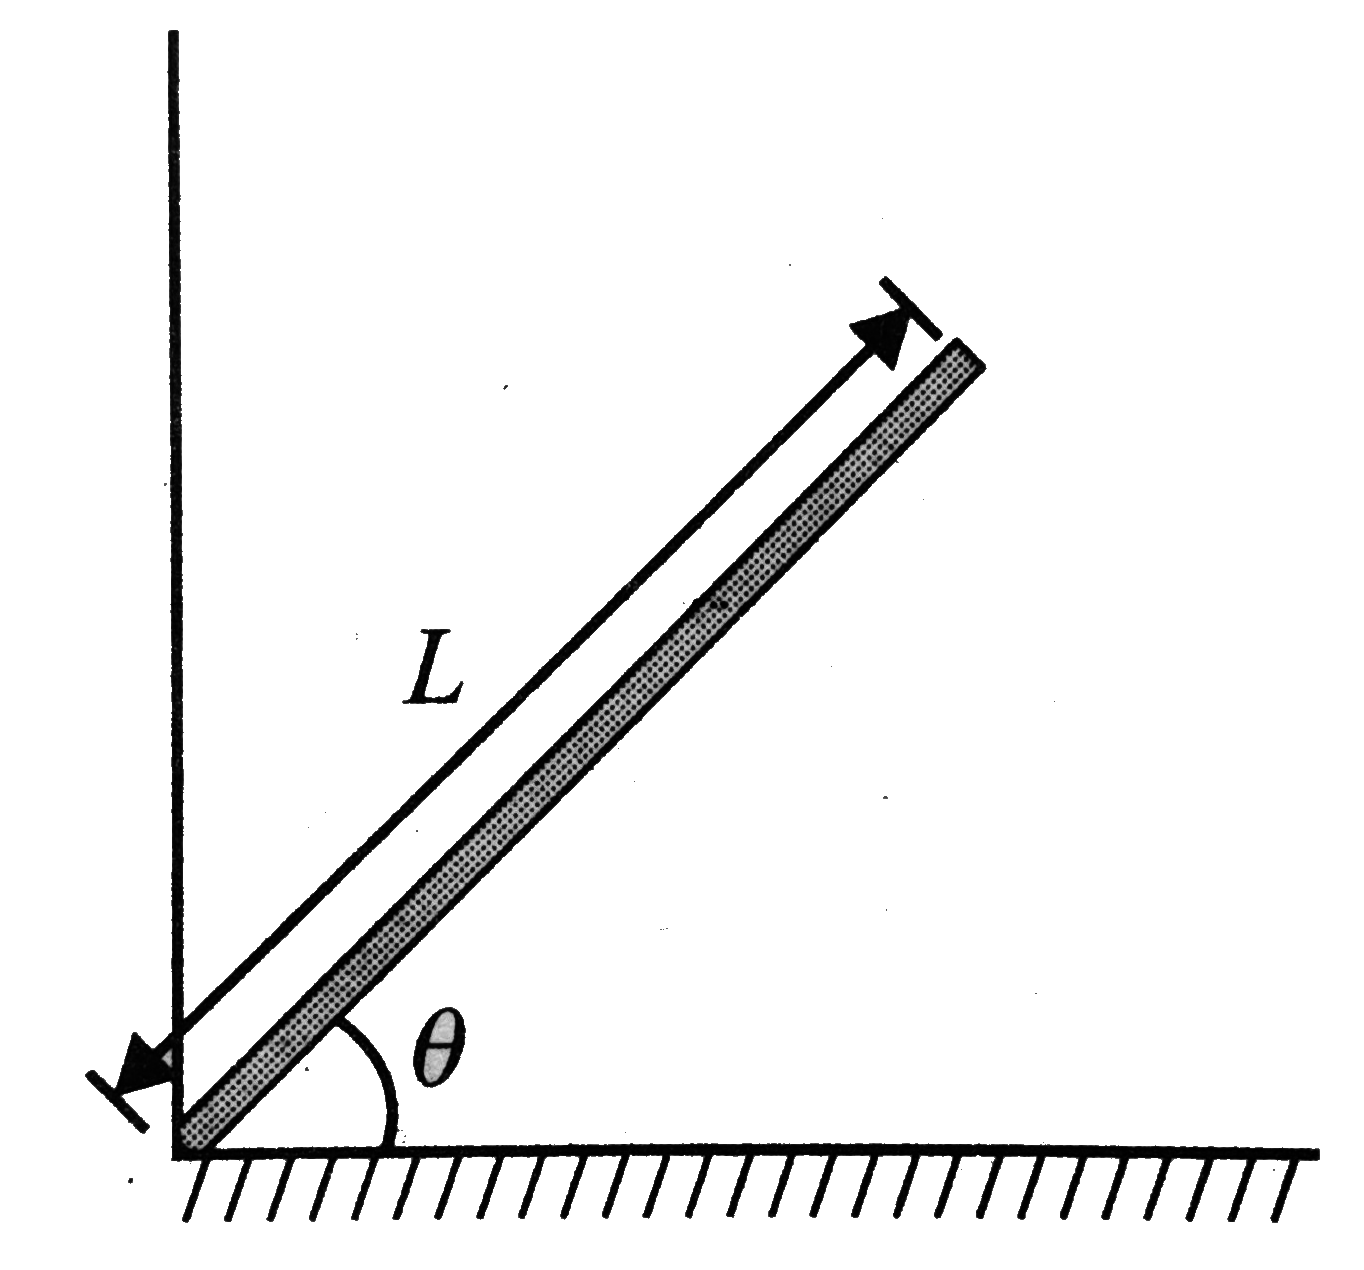 A uniform pole of length L and mass M is pivoted on the ground with a frictionless hinge. The pole makes an angle theta with the horizontal. The moment of inertia of the pole about one end is ( 1/3) ML^(2). If it starts falling front the position shown in the accompanying figure, the linear acceleration of the free end of the pole immediately after release would be